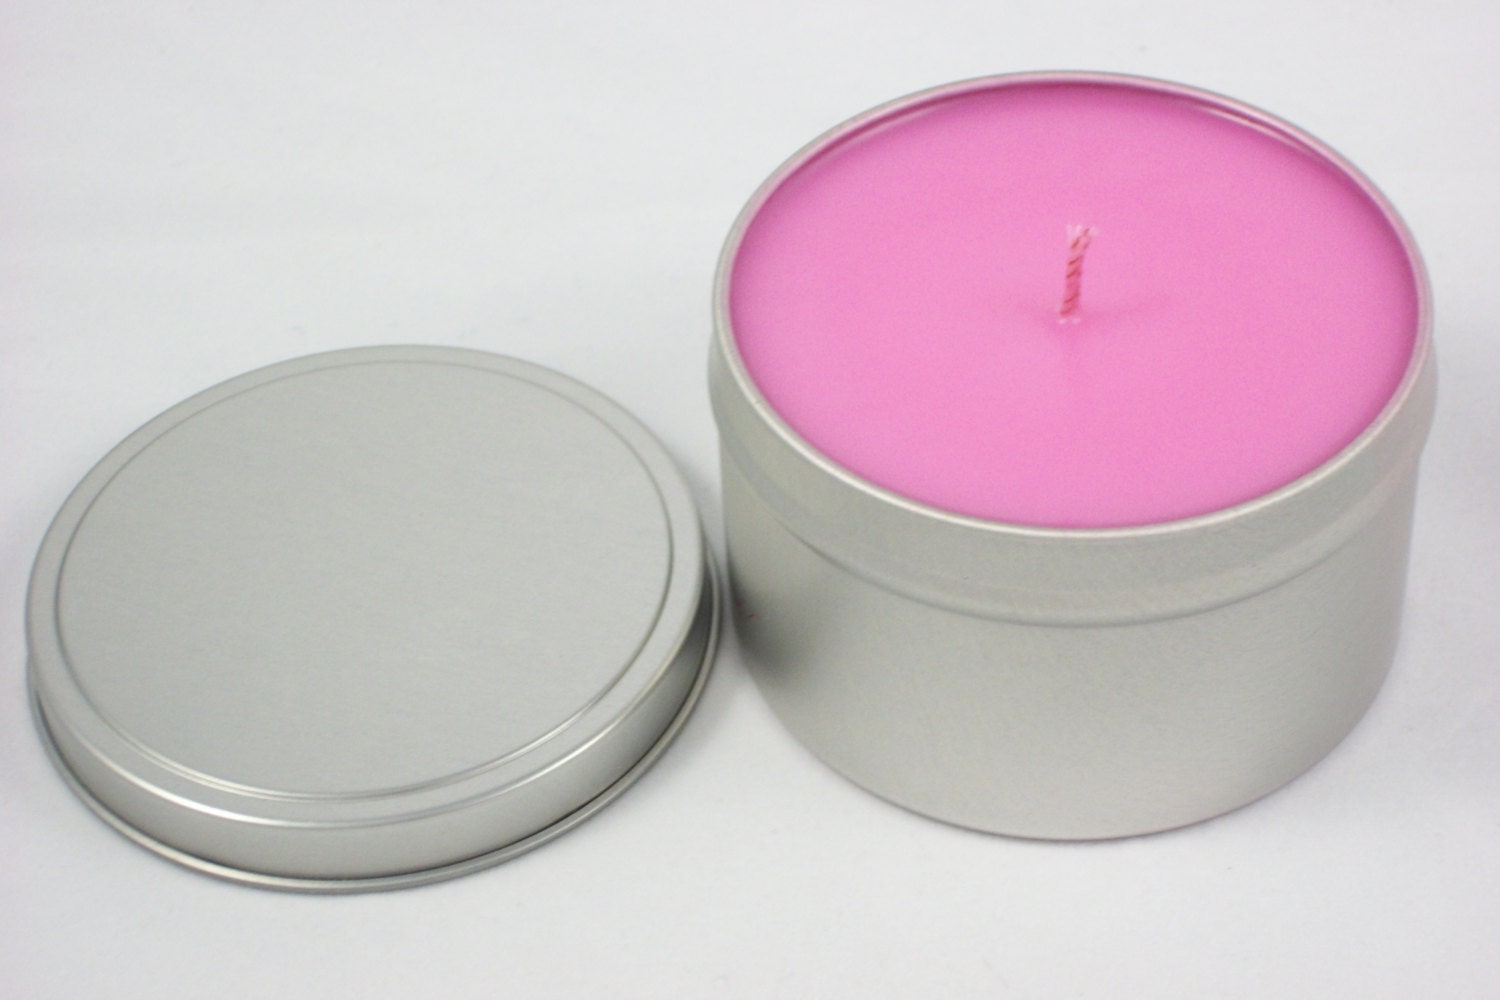 Sky Candy • Organic Soy Wax Candle